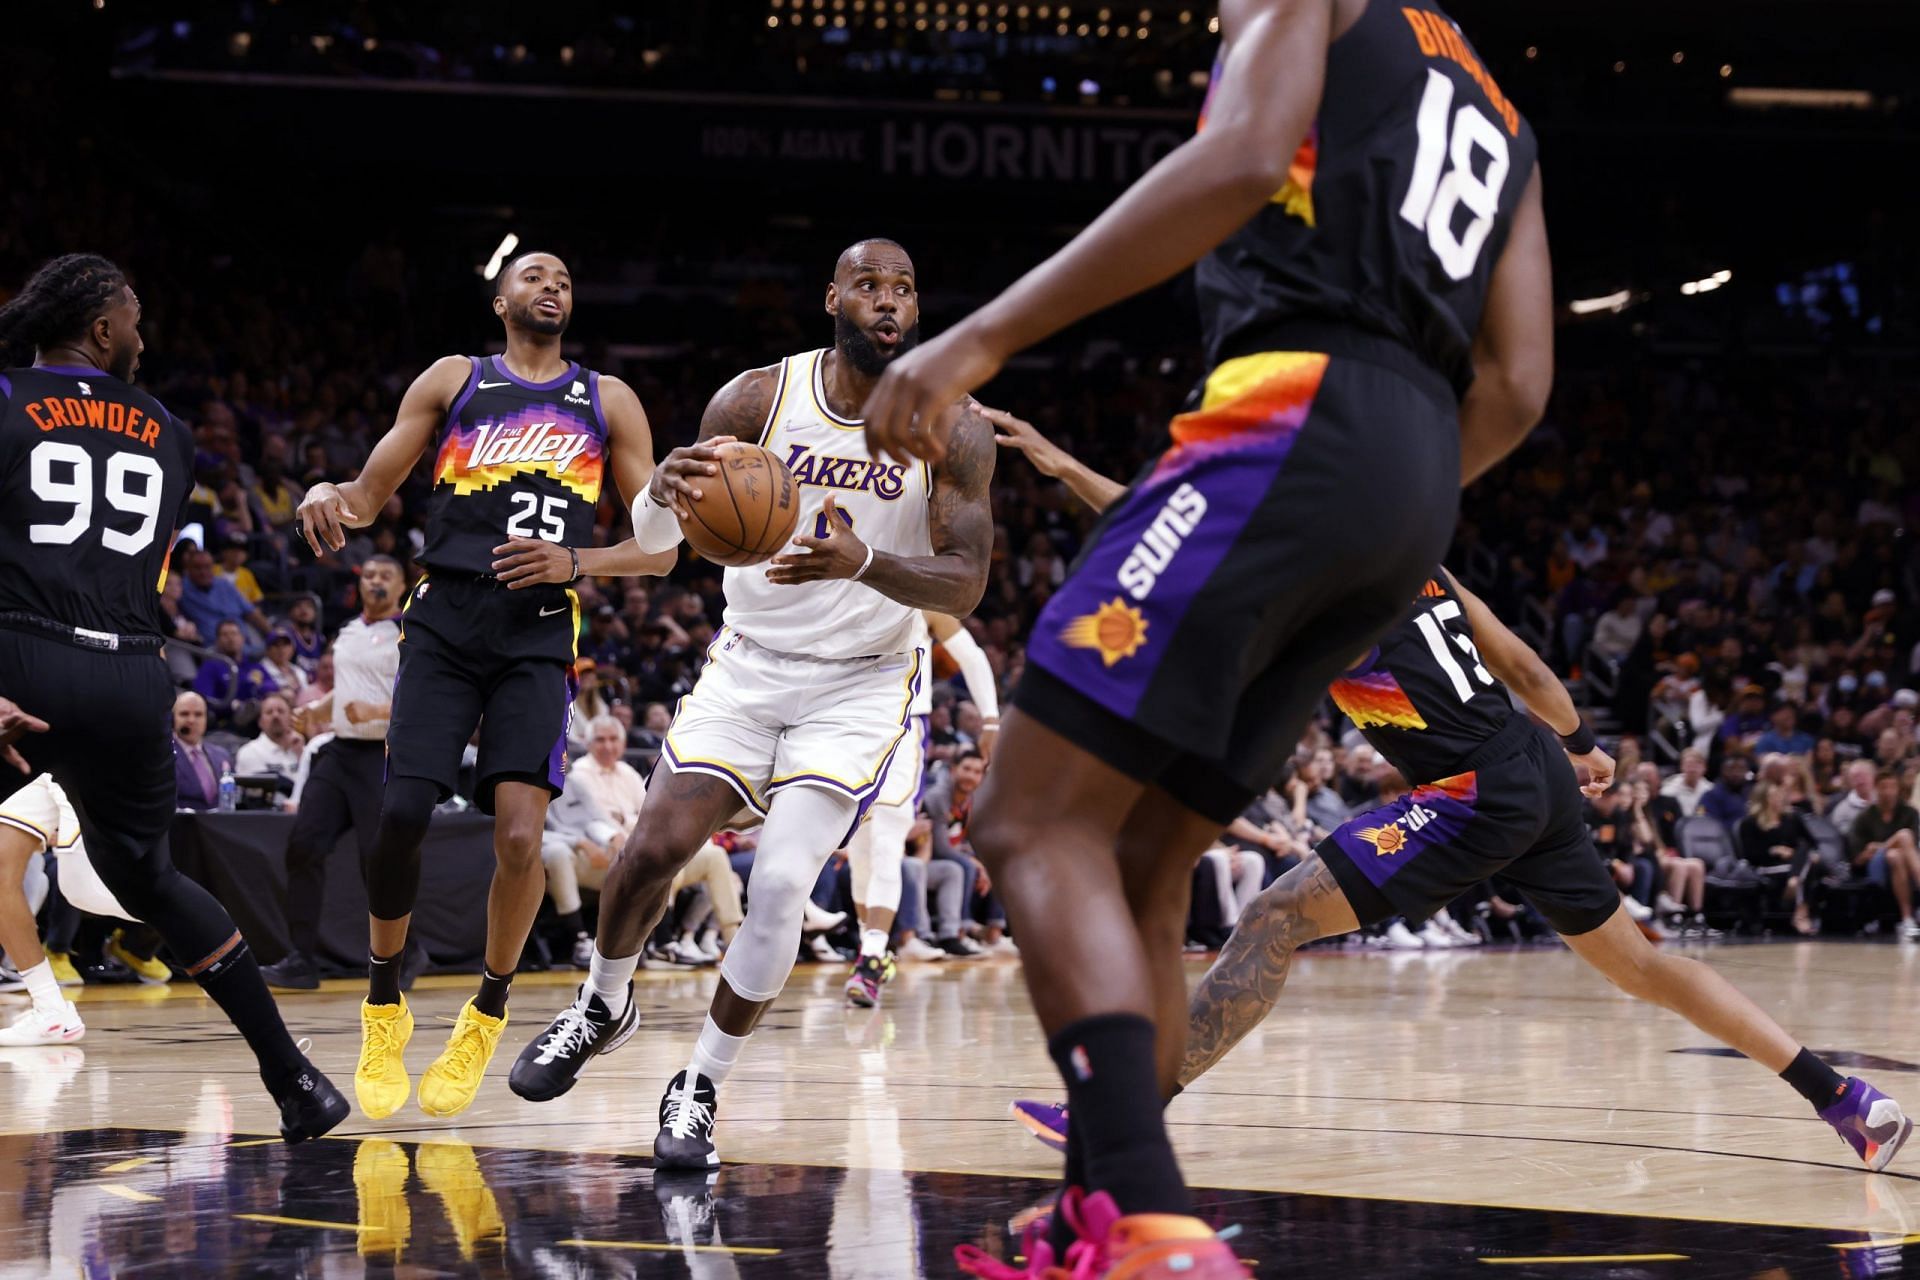 LeBron James&#039; career milestone was the only bright spot for the LA Lakers in the humiliating loss to the Phoenix Suns. [Photo: Slamonline.com]